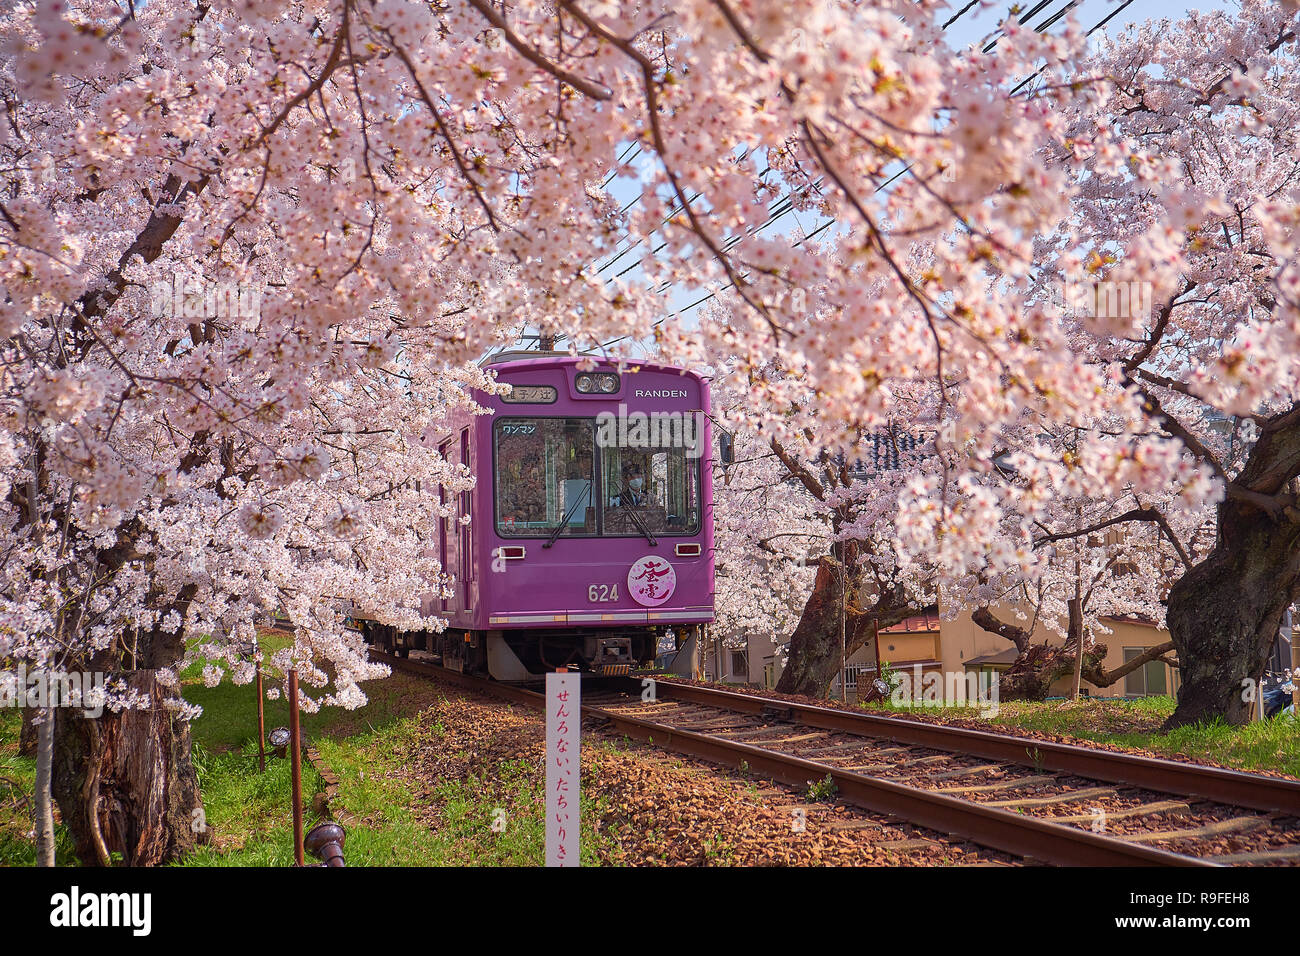 Local purple train going through a tunnel formed by branches of  cherry blossom trees in bloom. Stock Photo